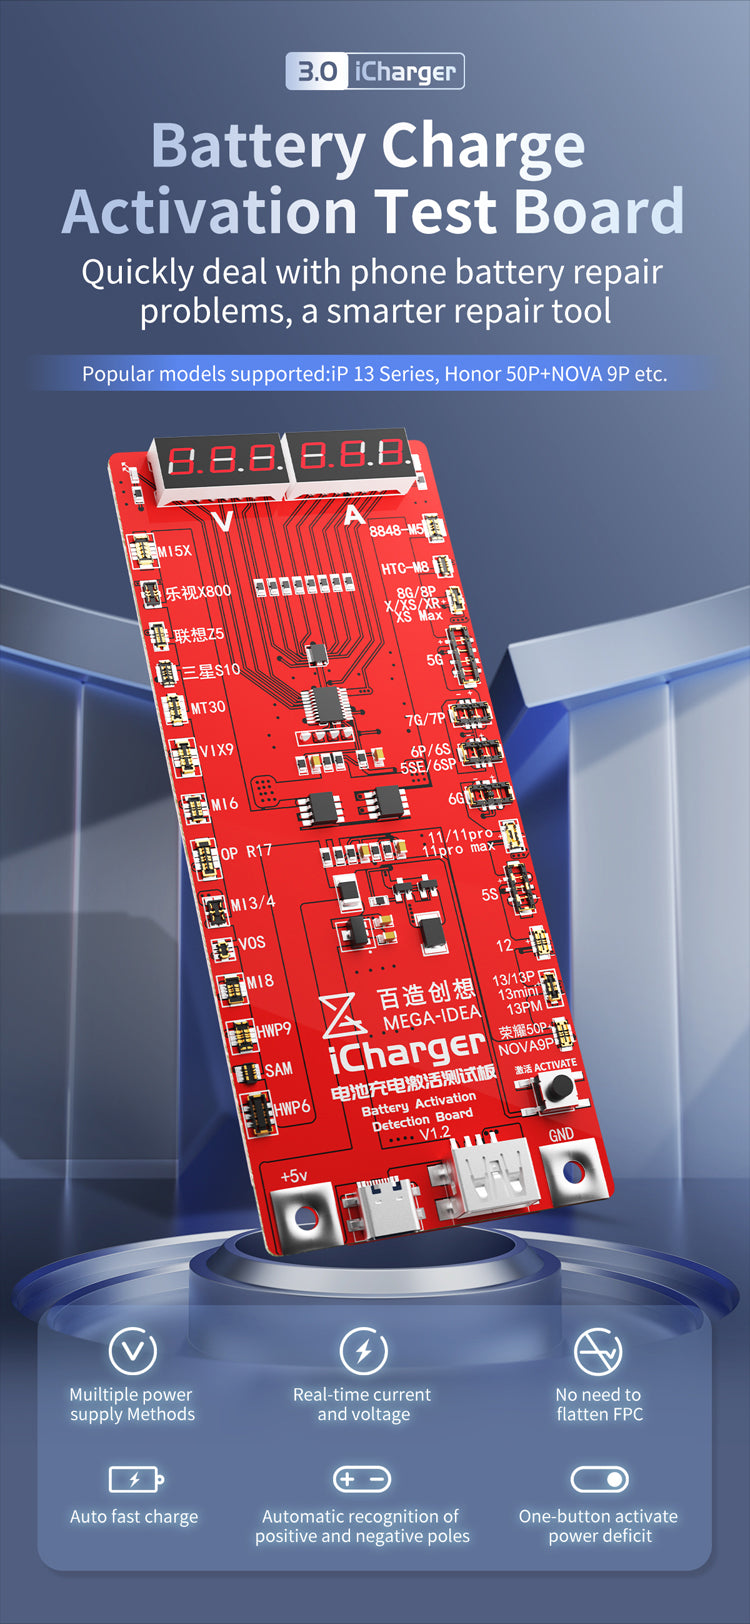 Qianli MEGA-IDEA iCharger 3.0 Battery Charge Activation Test Board